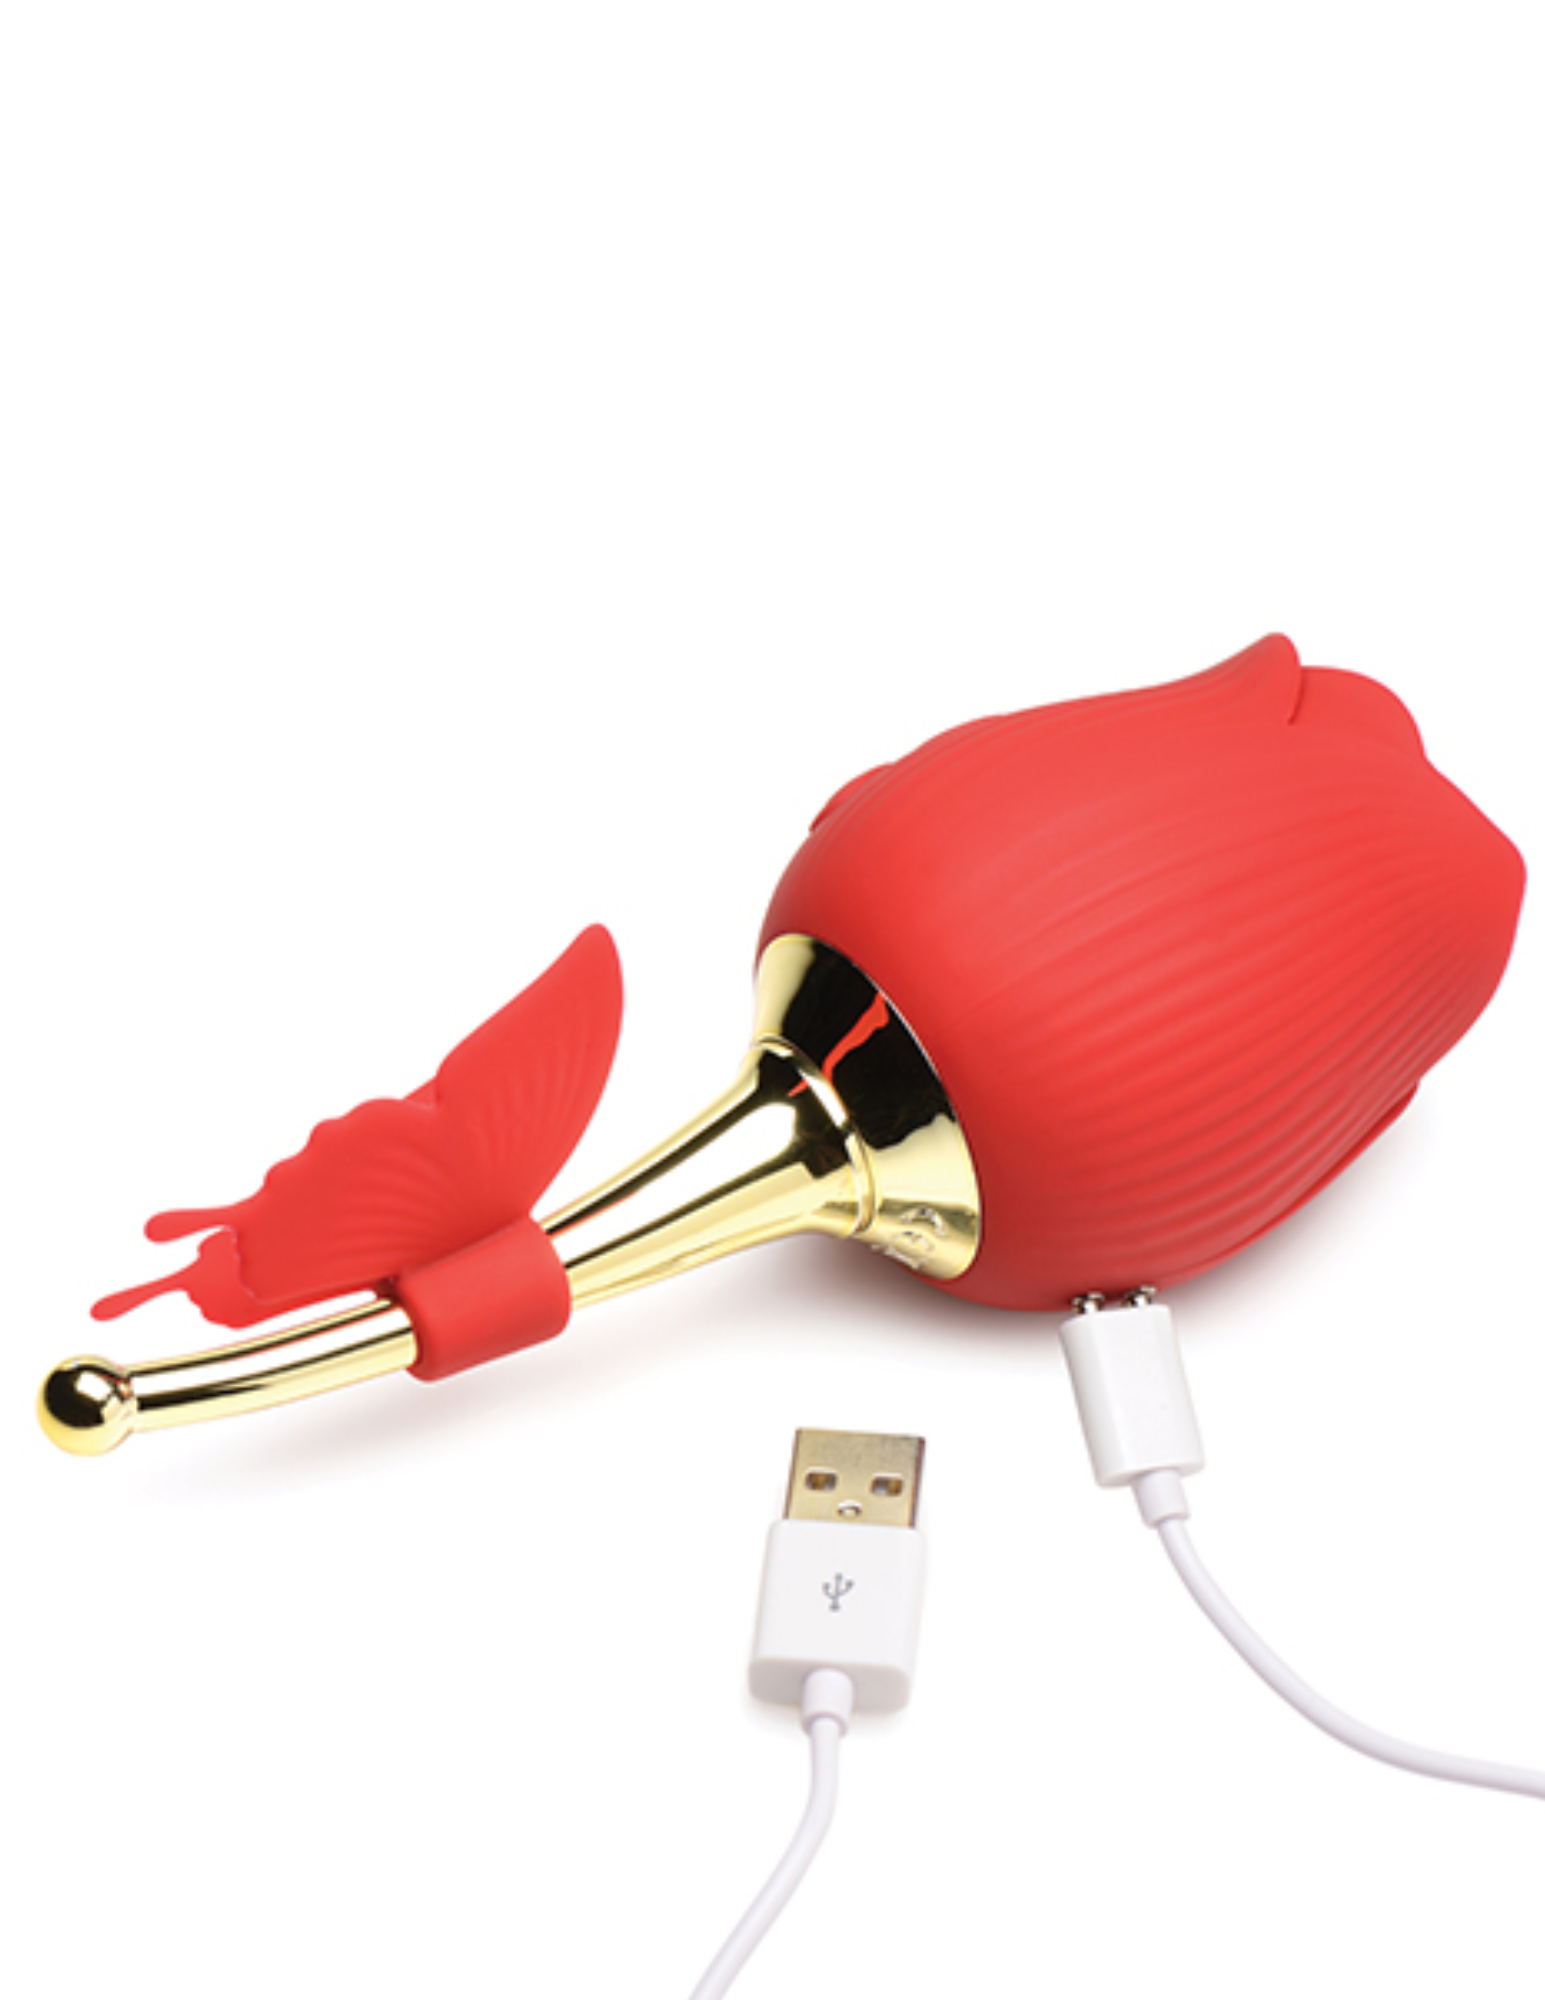 Photo  of the Bloomgasm Flutter Rose w/ Butterfly Teaser from XR Brands shows how to connect the magnetic charging cord to the toy.